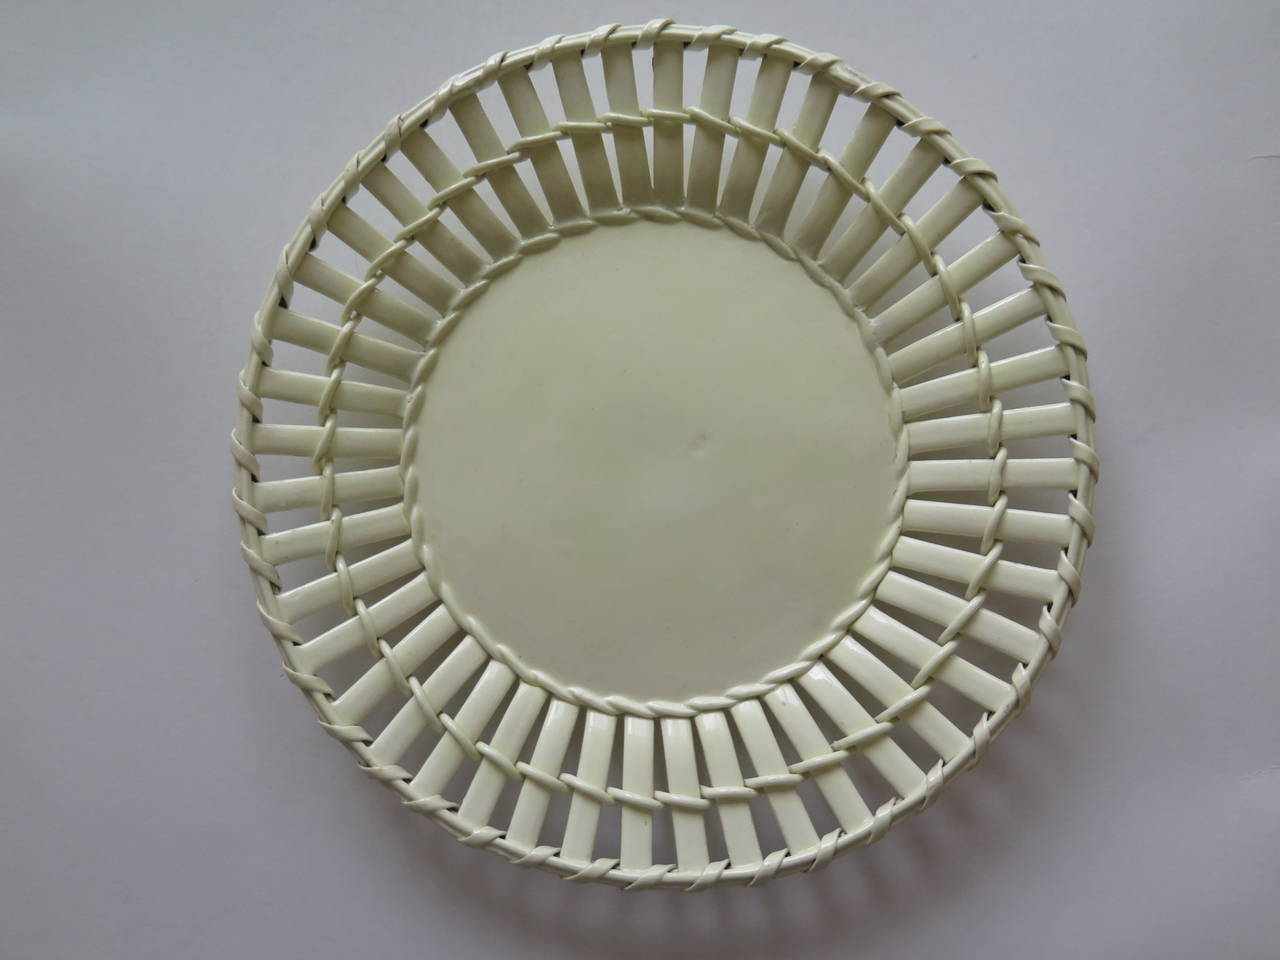 This is an excellent latticed creamware dish or plate by Leeds Pottery of Jack Lane, Hunslet, Leeds in Yorkshire, England, made in the late 18th Century, circa 1790.

The plate is made of a type of earthenware called Cream-ware

This plate has a